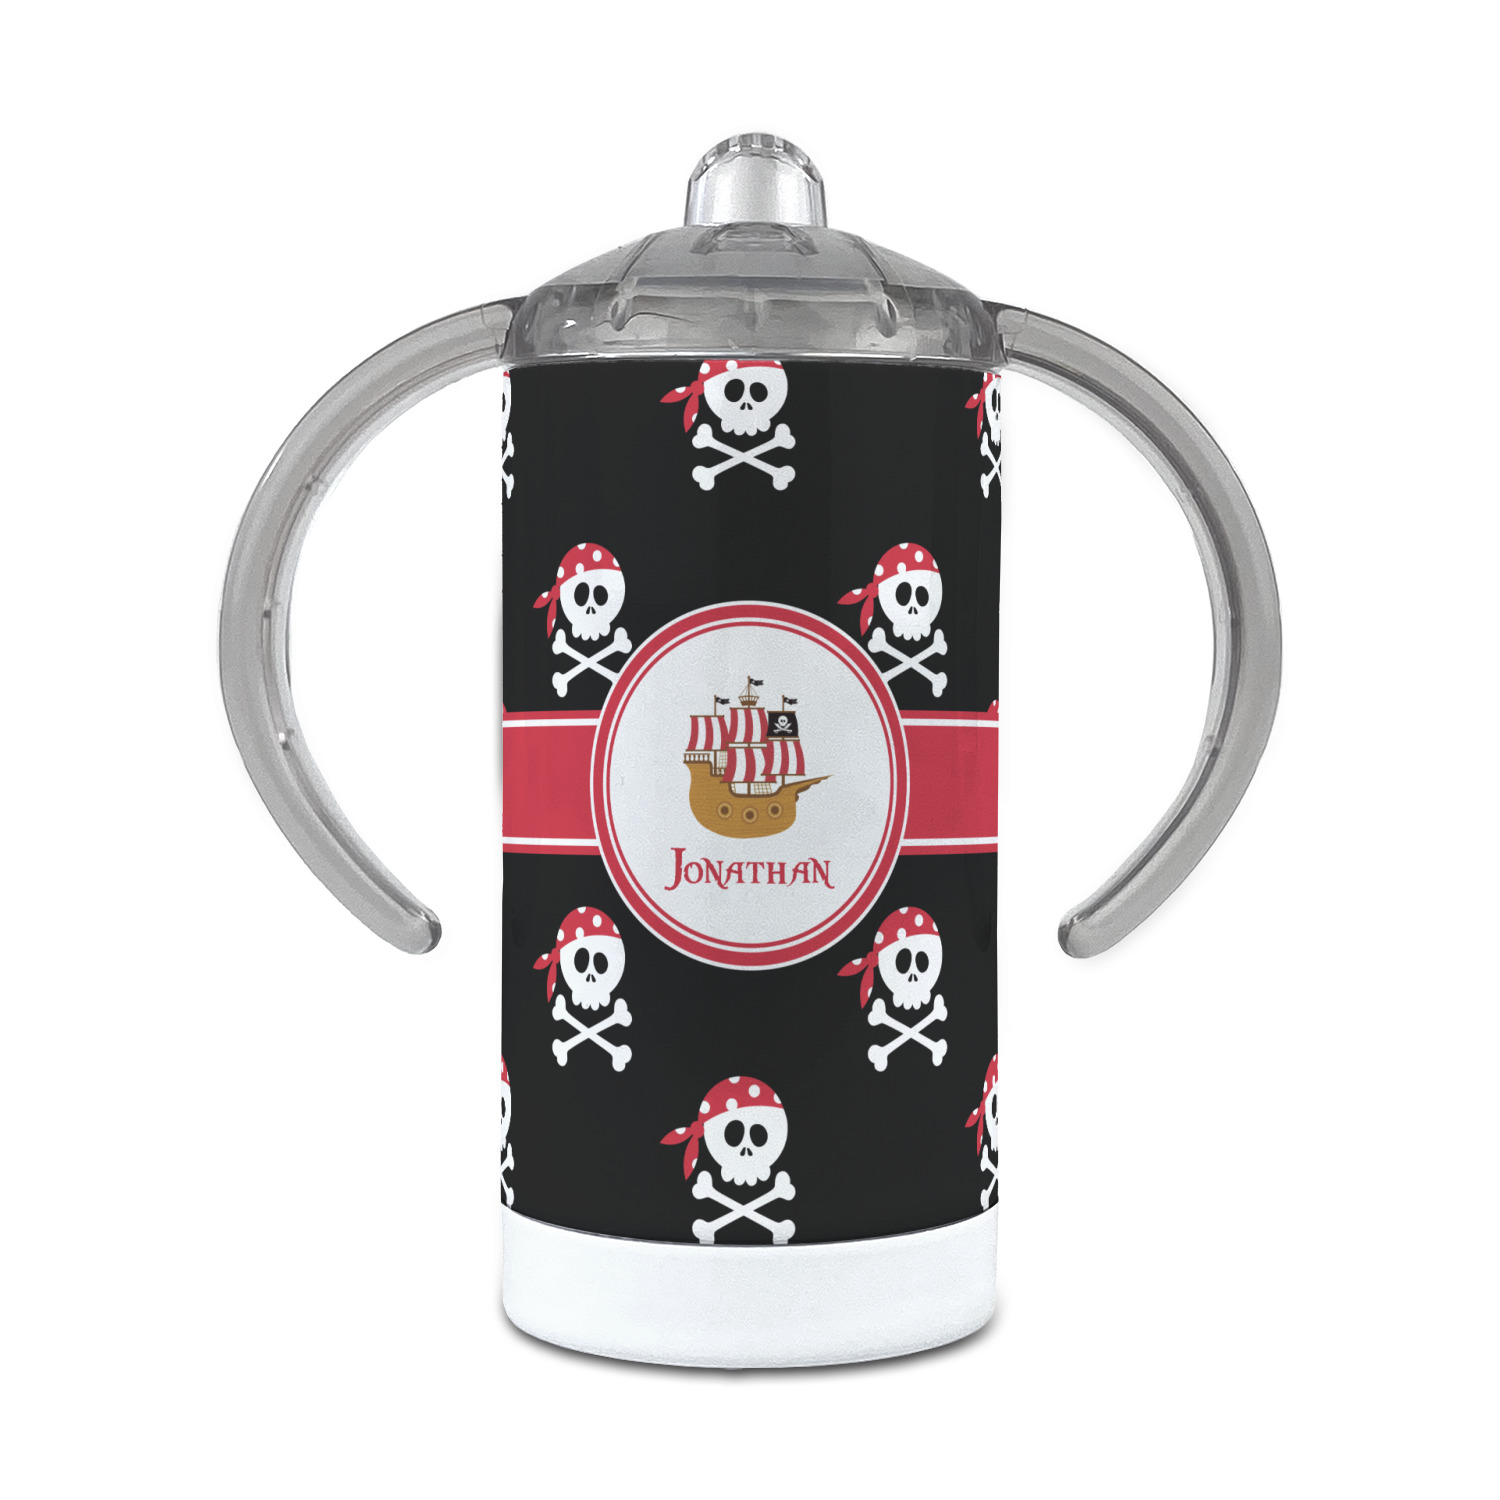 https://www.youcustomizeit.com/common/MAKE/40857/Pirate-12-oz-Stainless-Steel-Sippy-Cups-FRONT.jpg?lm=1671171865